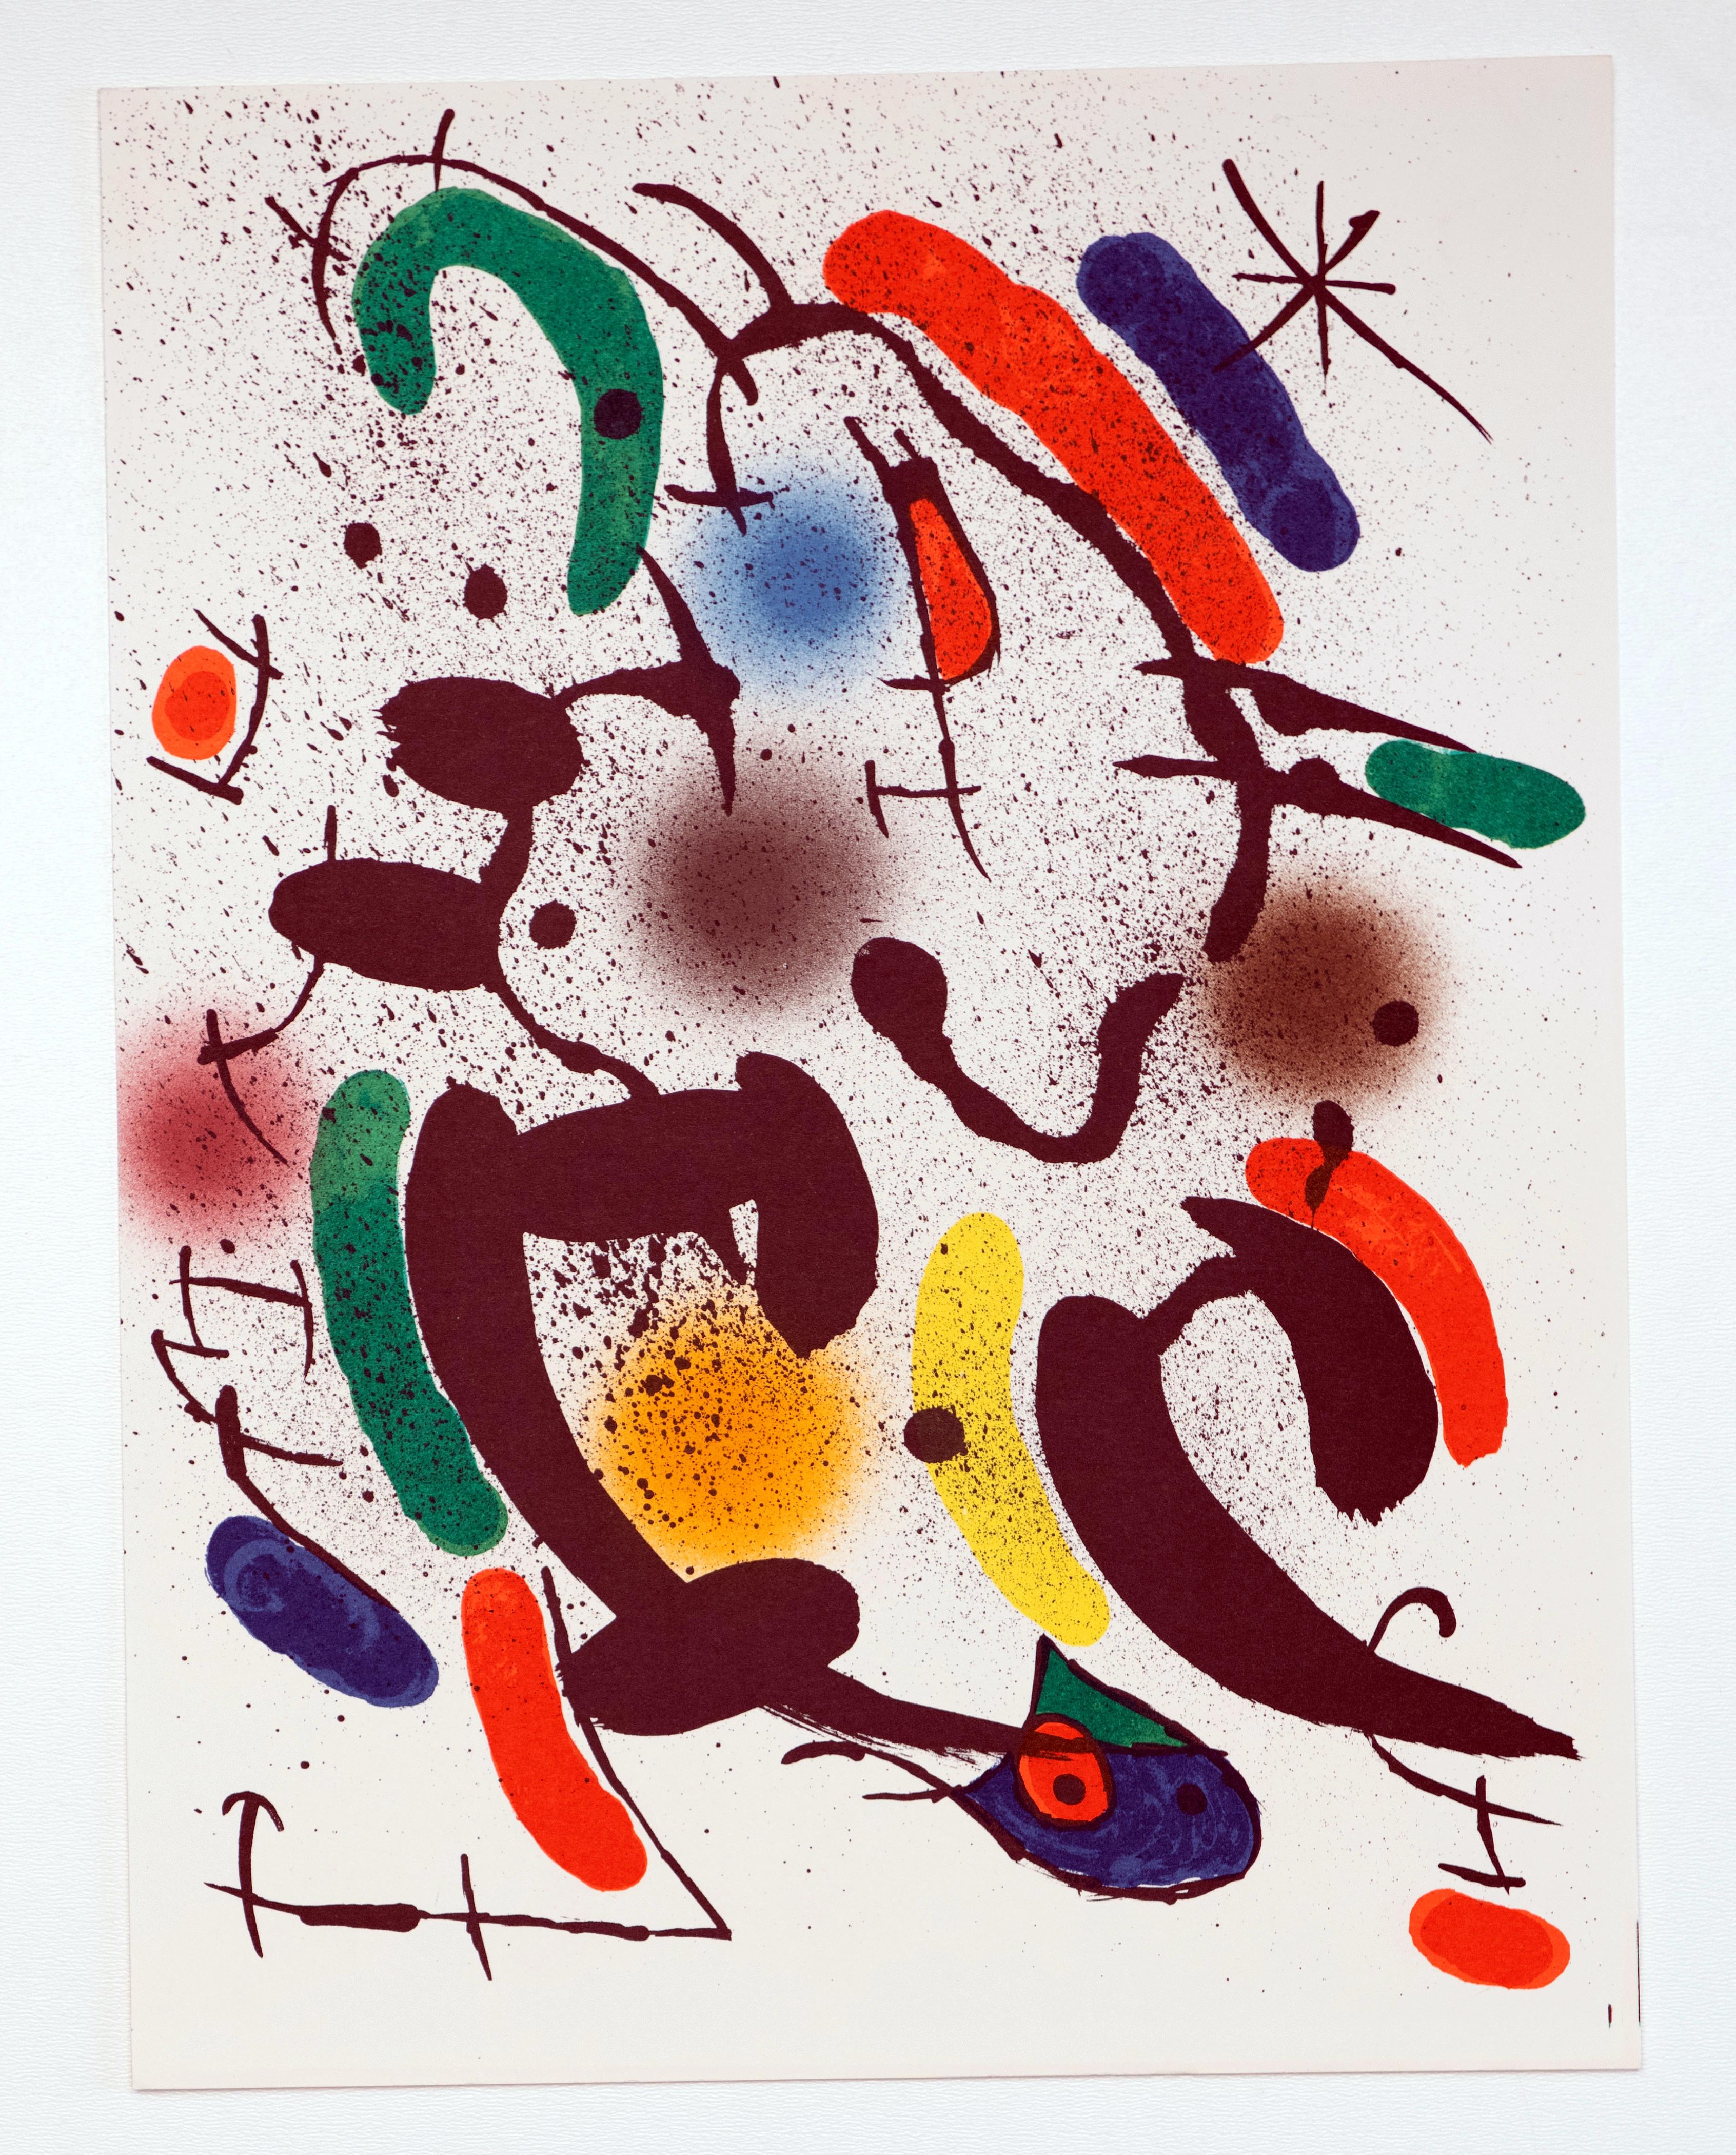 Beautiful art piece by Joan Miro: lithografia I. Ask for more information. 
Abstract Expressionism, Surrealism, Dada, Experimental, Avant-garde.

The work embraces dream imagery and “psychic automatism".

Envisioning his artistic pursuit as a